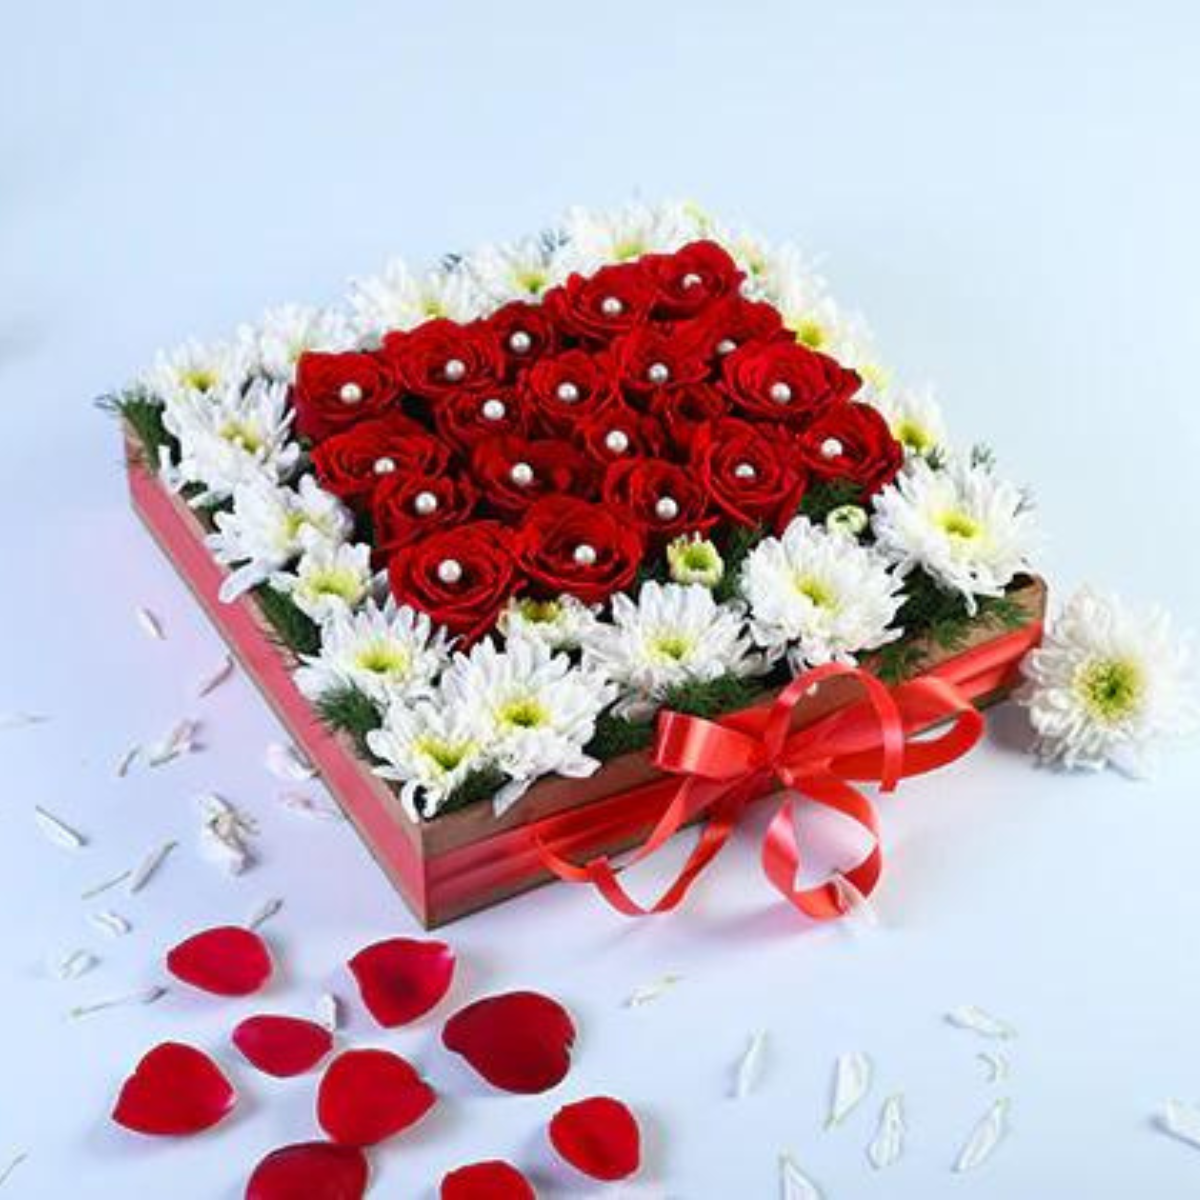 Send Flowers to Hyderabad with ① FloraZone  Same Day  Midnight Flower  Delivery in Hyderabad  Online Florist  Flora Zone